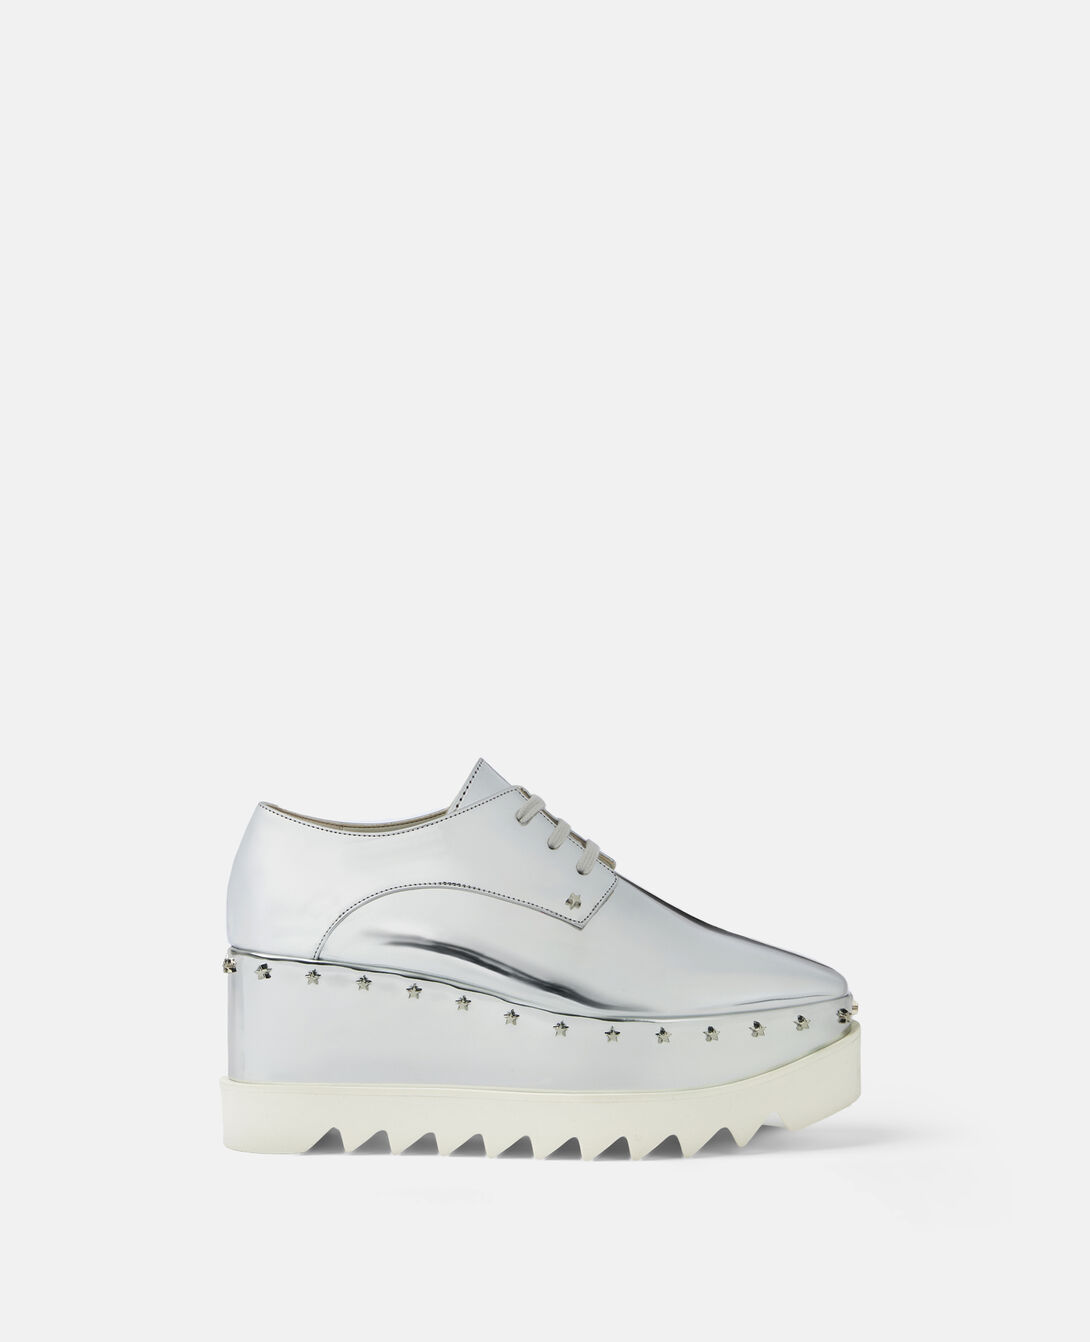 Stella McCartney Elyse Platforms in White with Red/Blue Sole